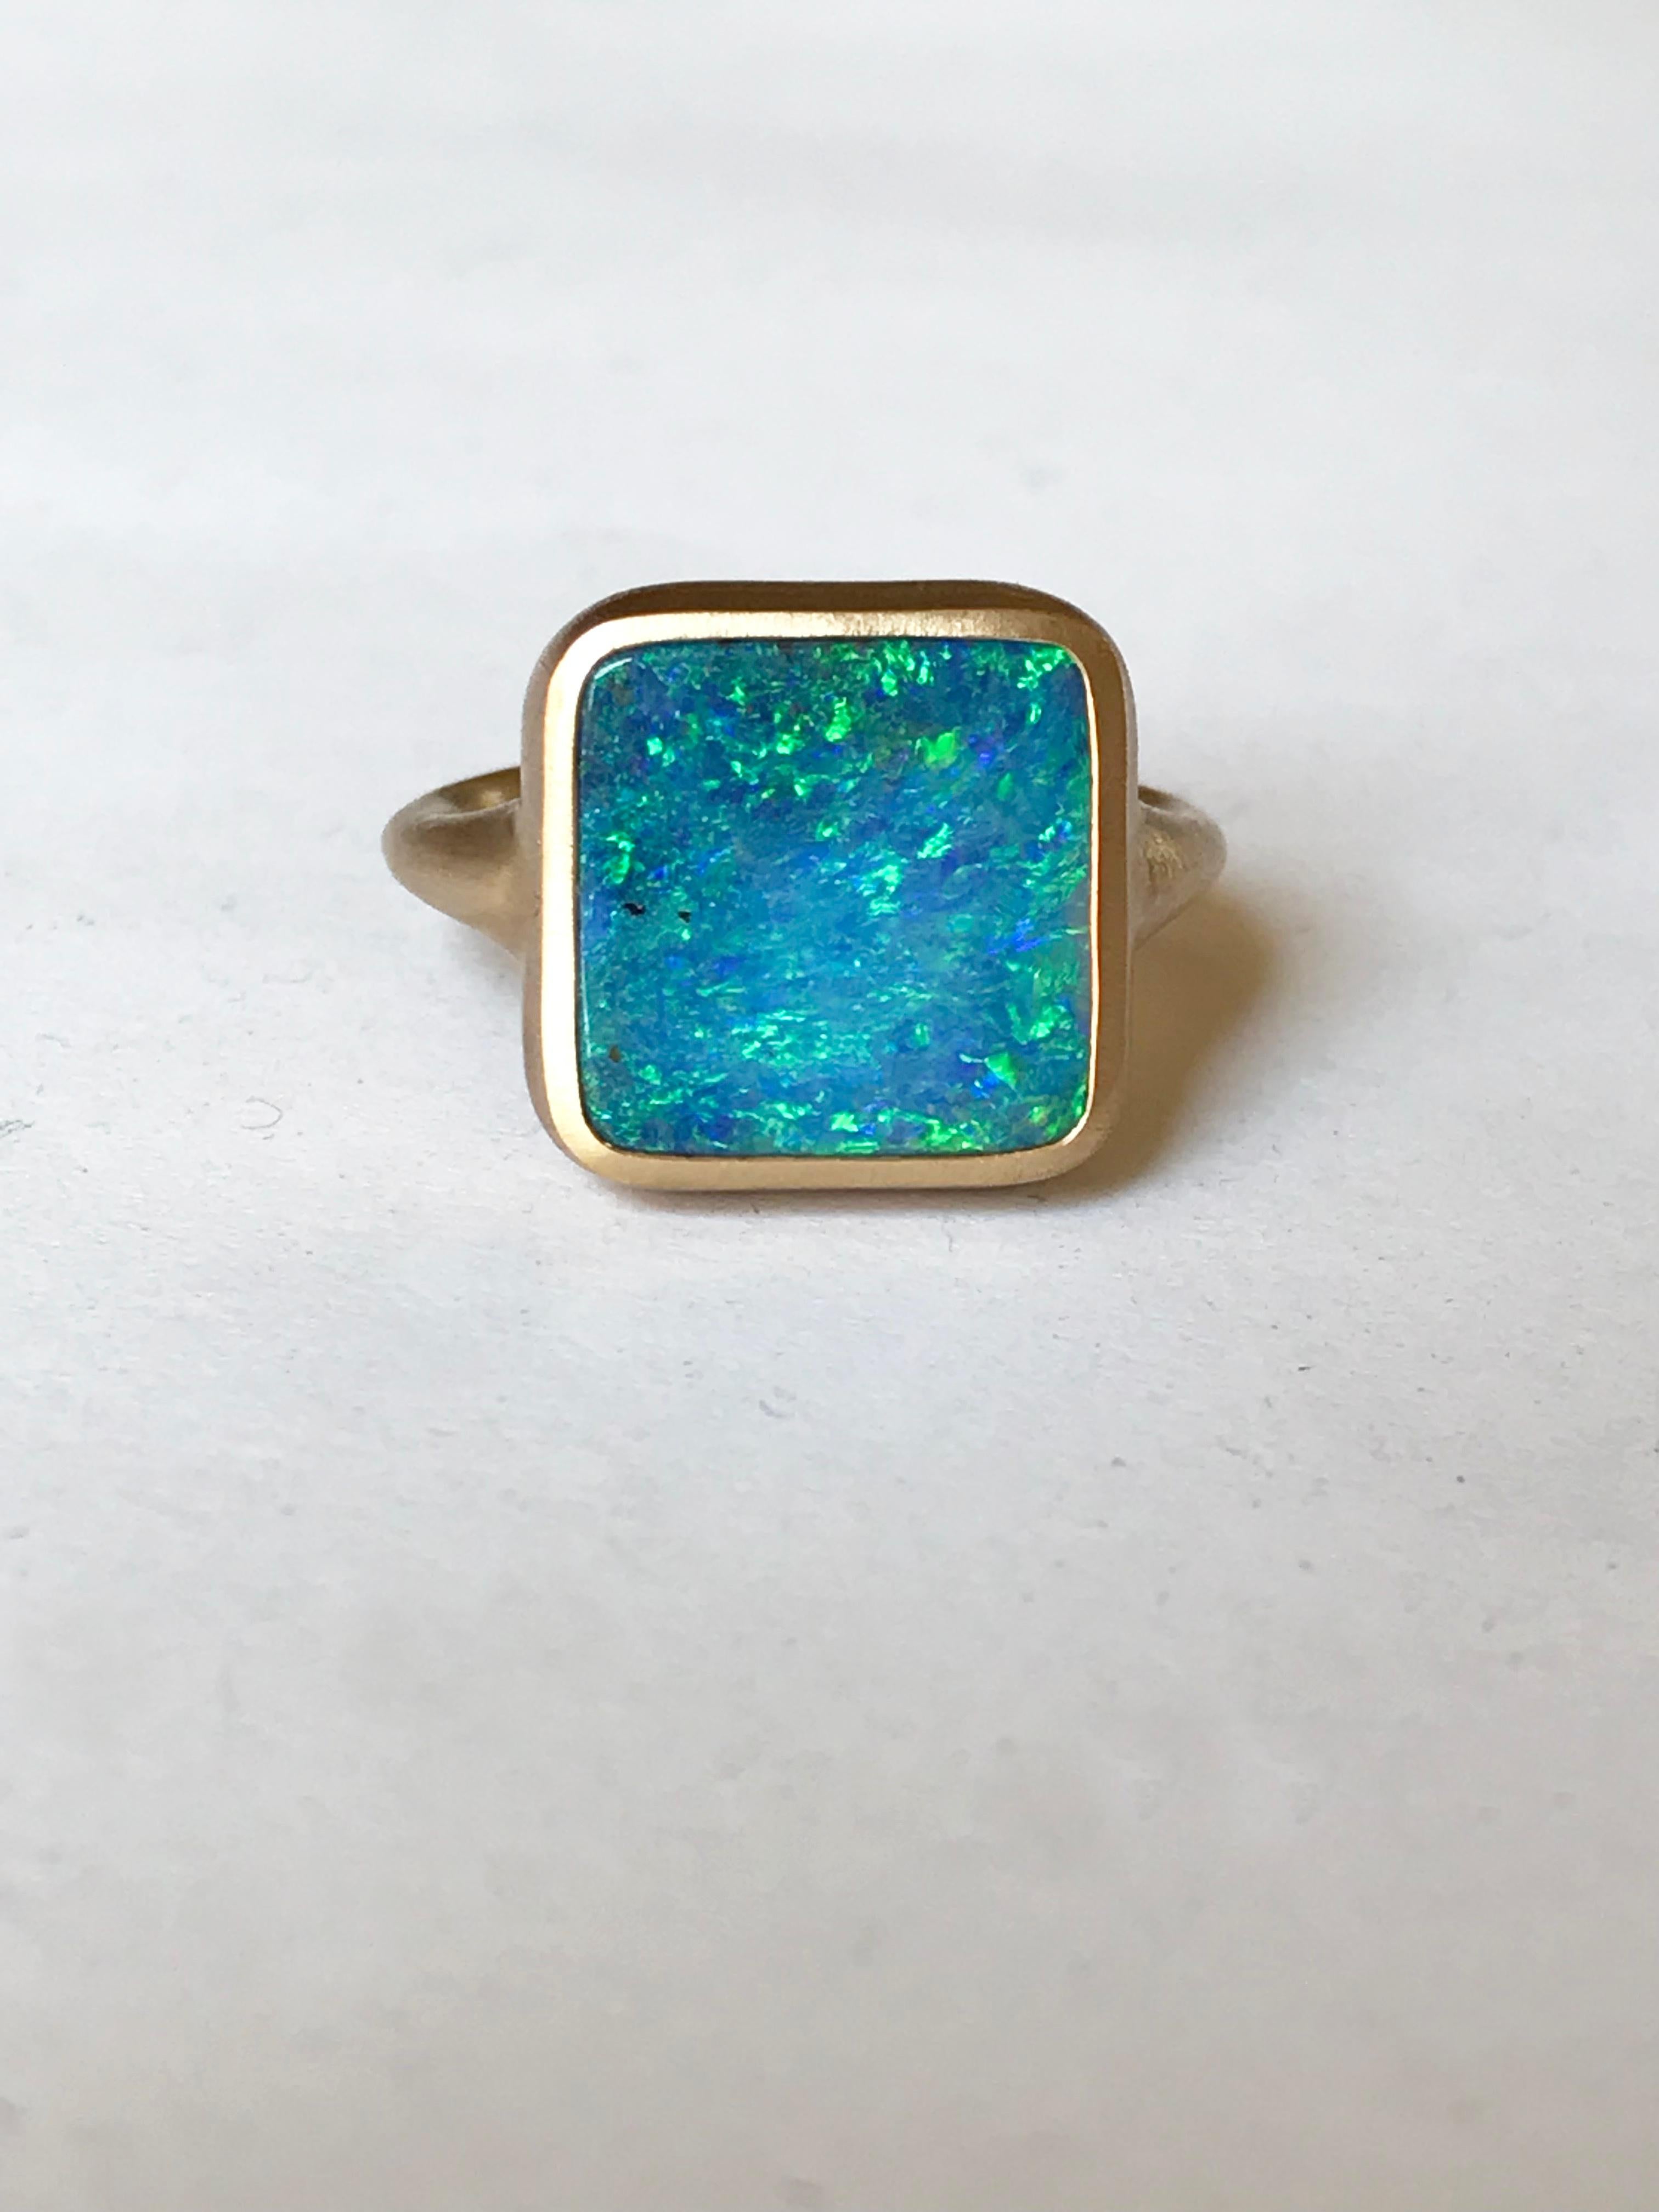 Dalben Blue Green Square Boulder Opal Yellow Gold Ring For Sale 1